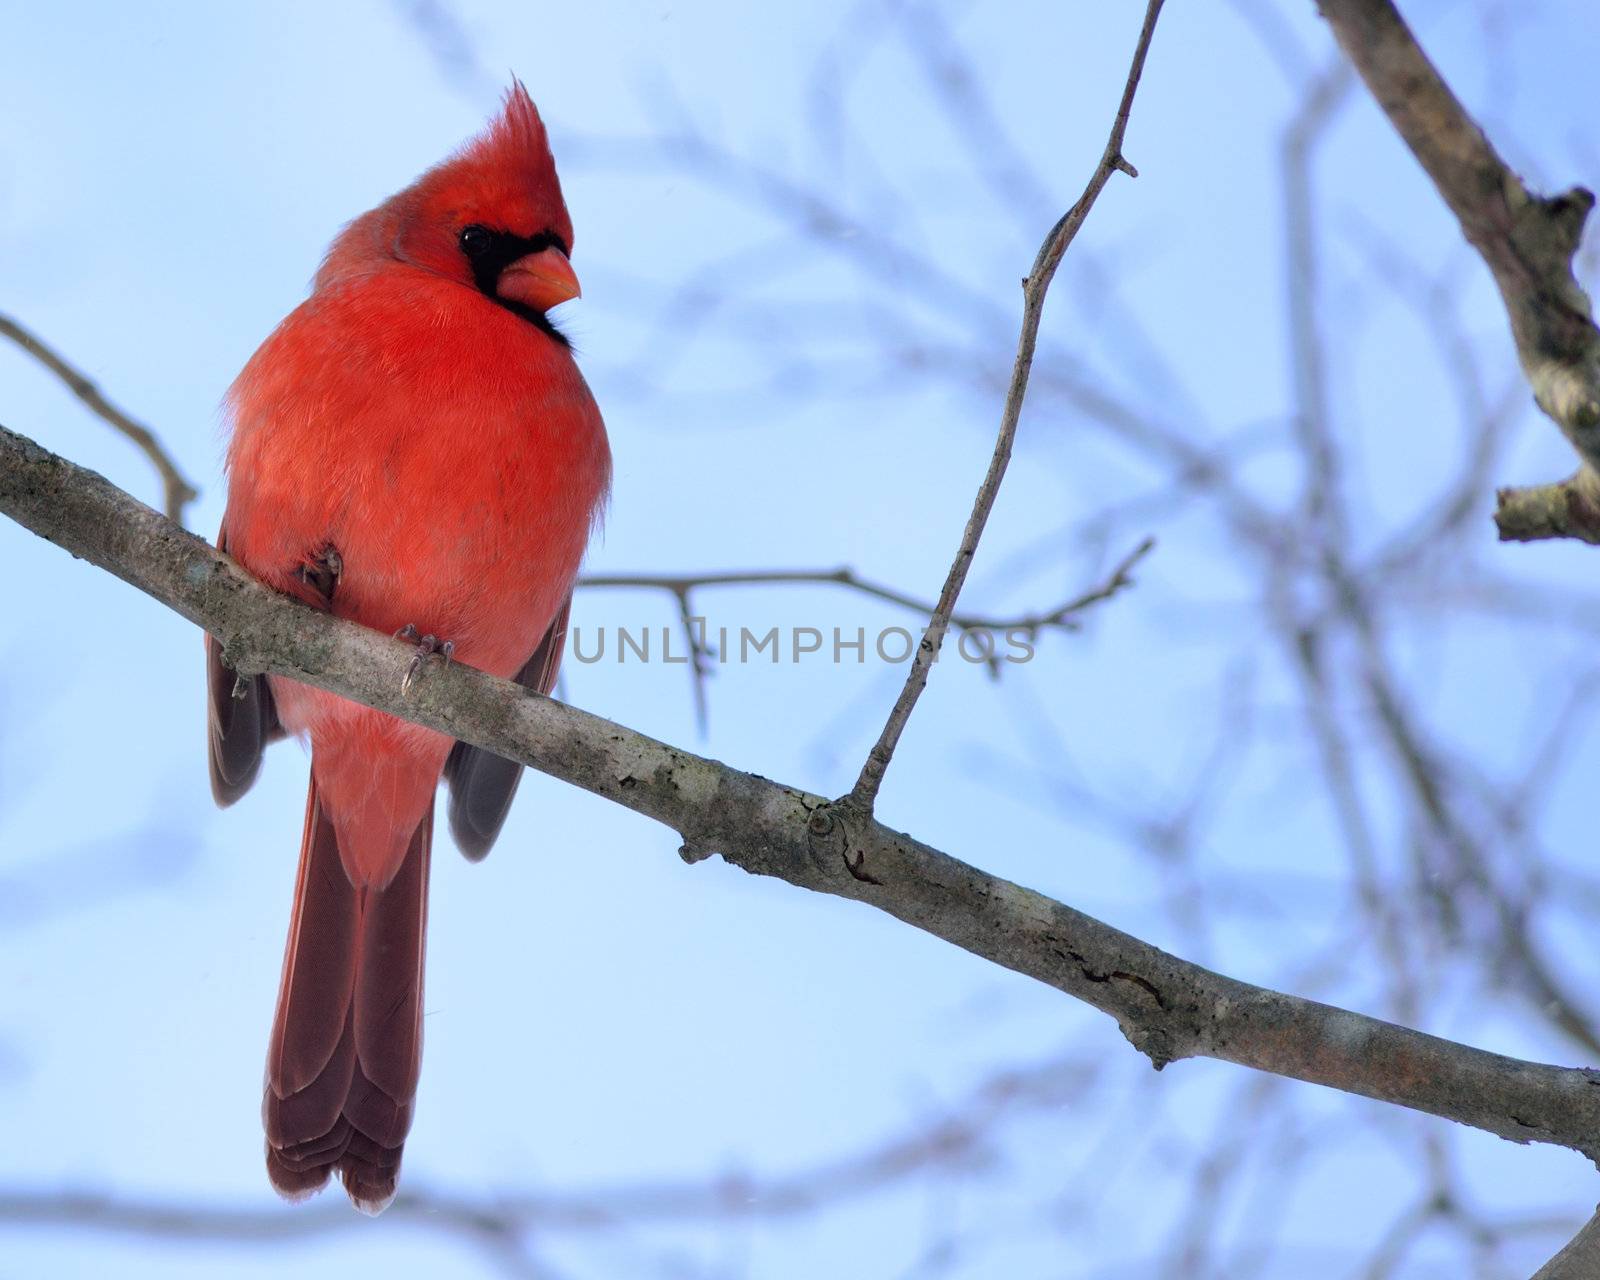 A male Cardinal perched on a tree branch.